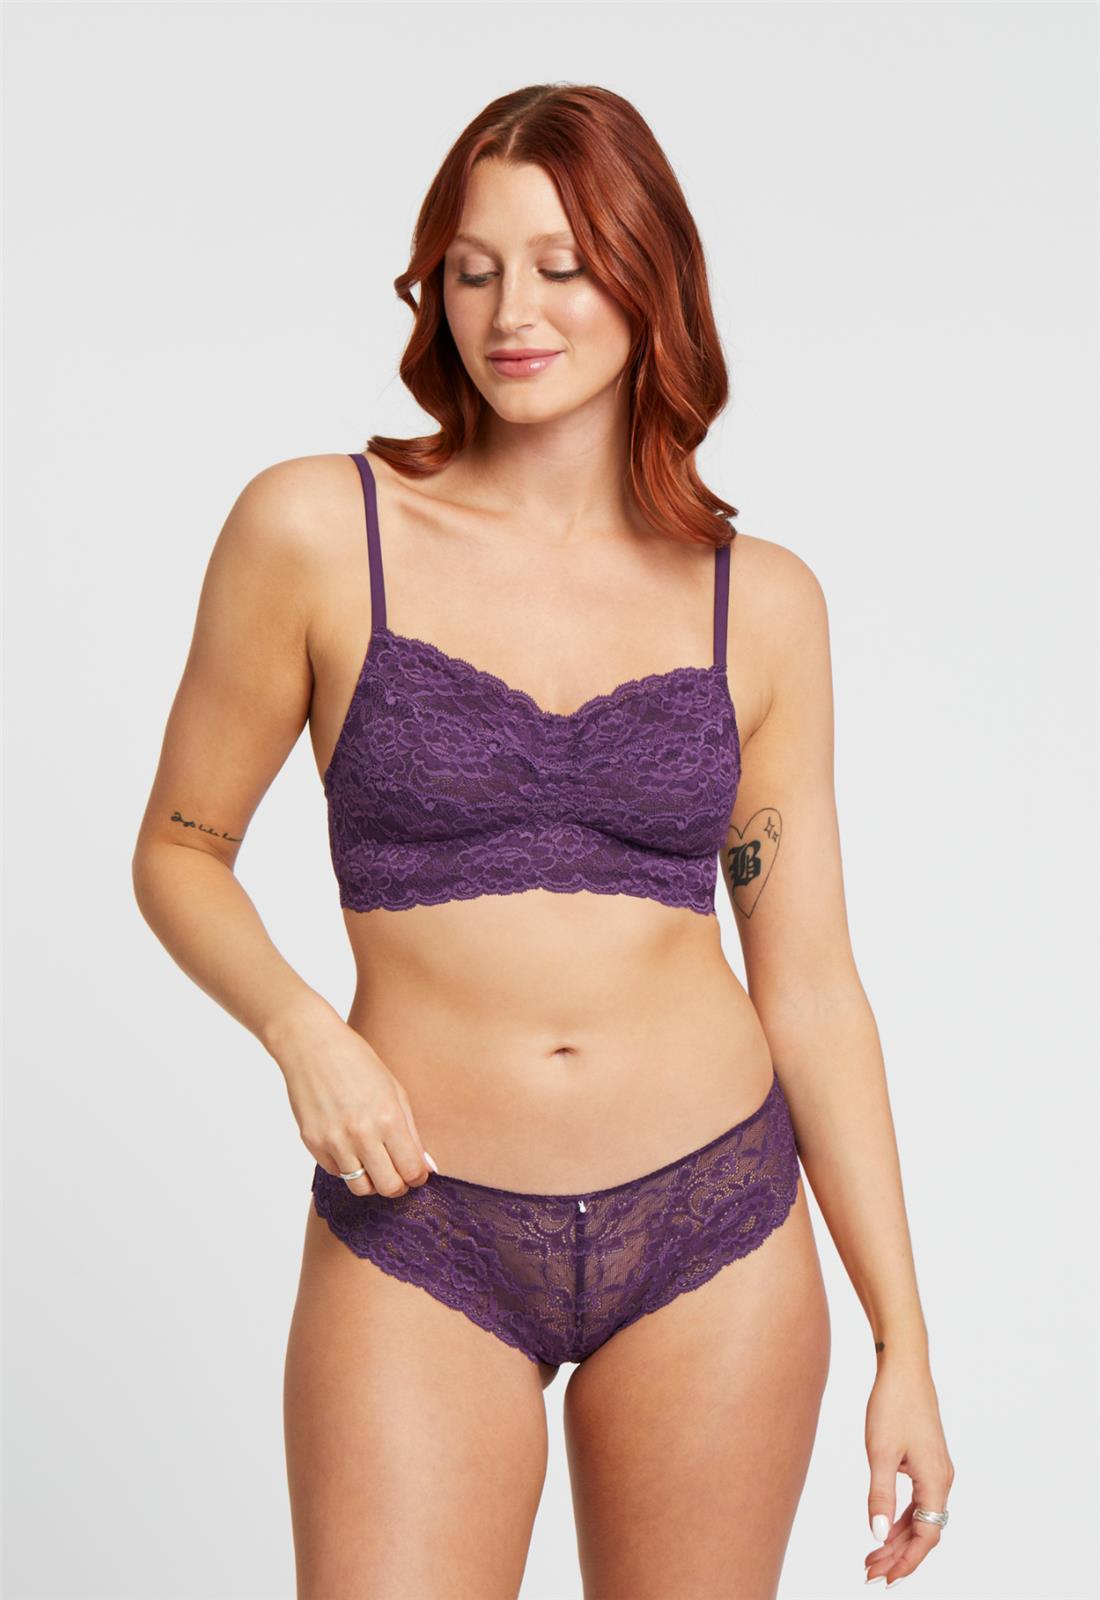 Cup-Sized Lace Bralette - Pinot worn by model front view